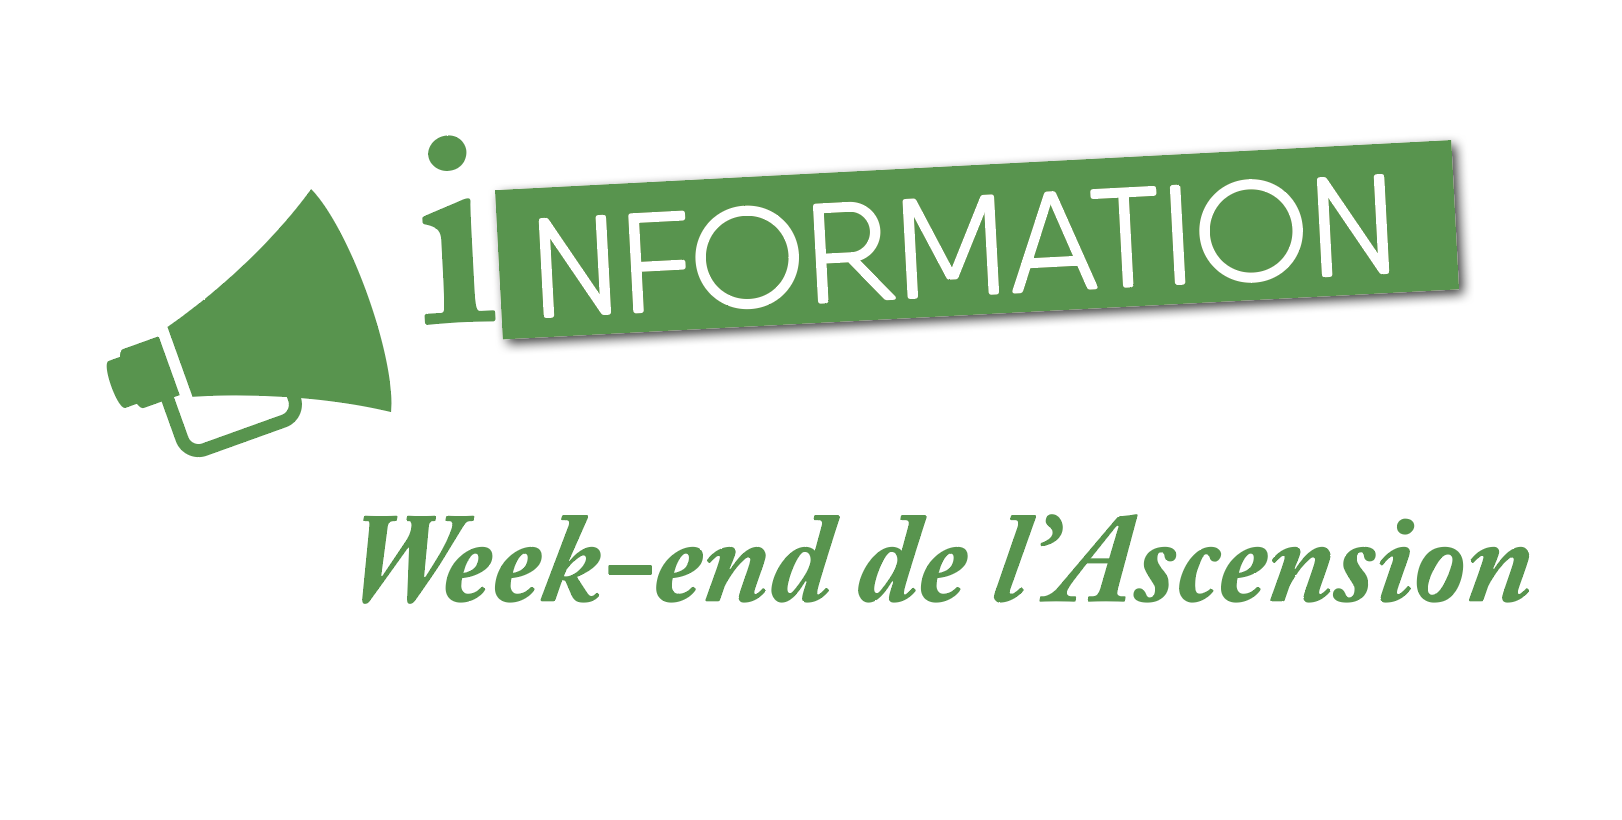 You are currently viewing INFORMATION WEEK-END DE L’ASCENSION